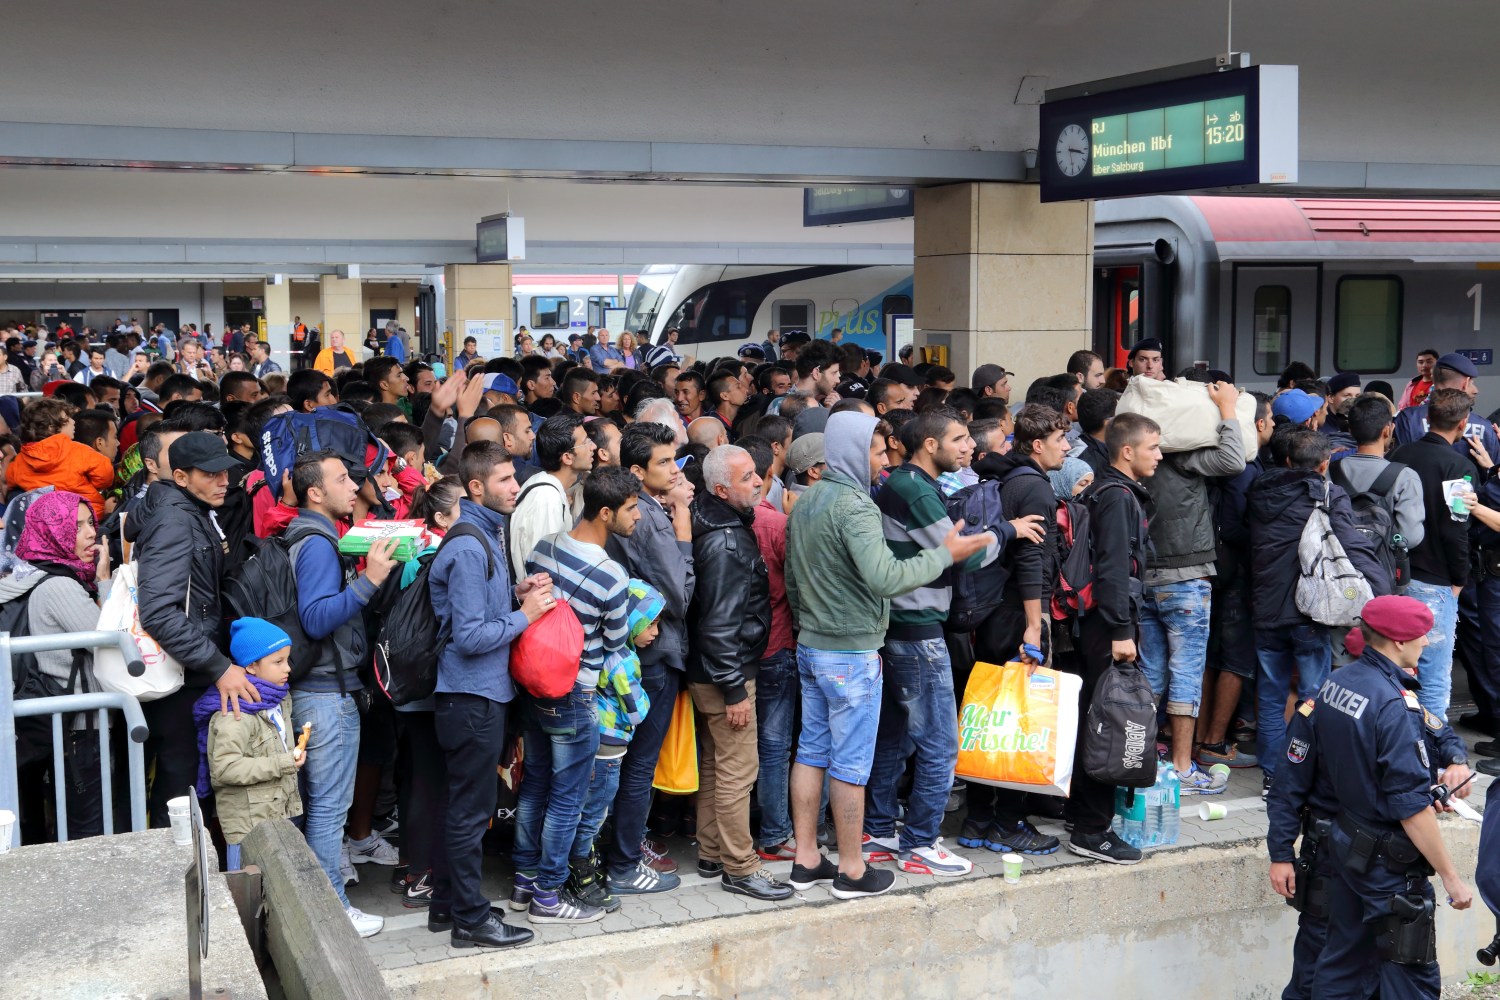 Refugees at Vienna West Railway Station during the European migrant crisis 2015.